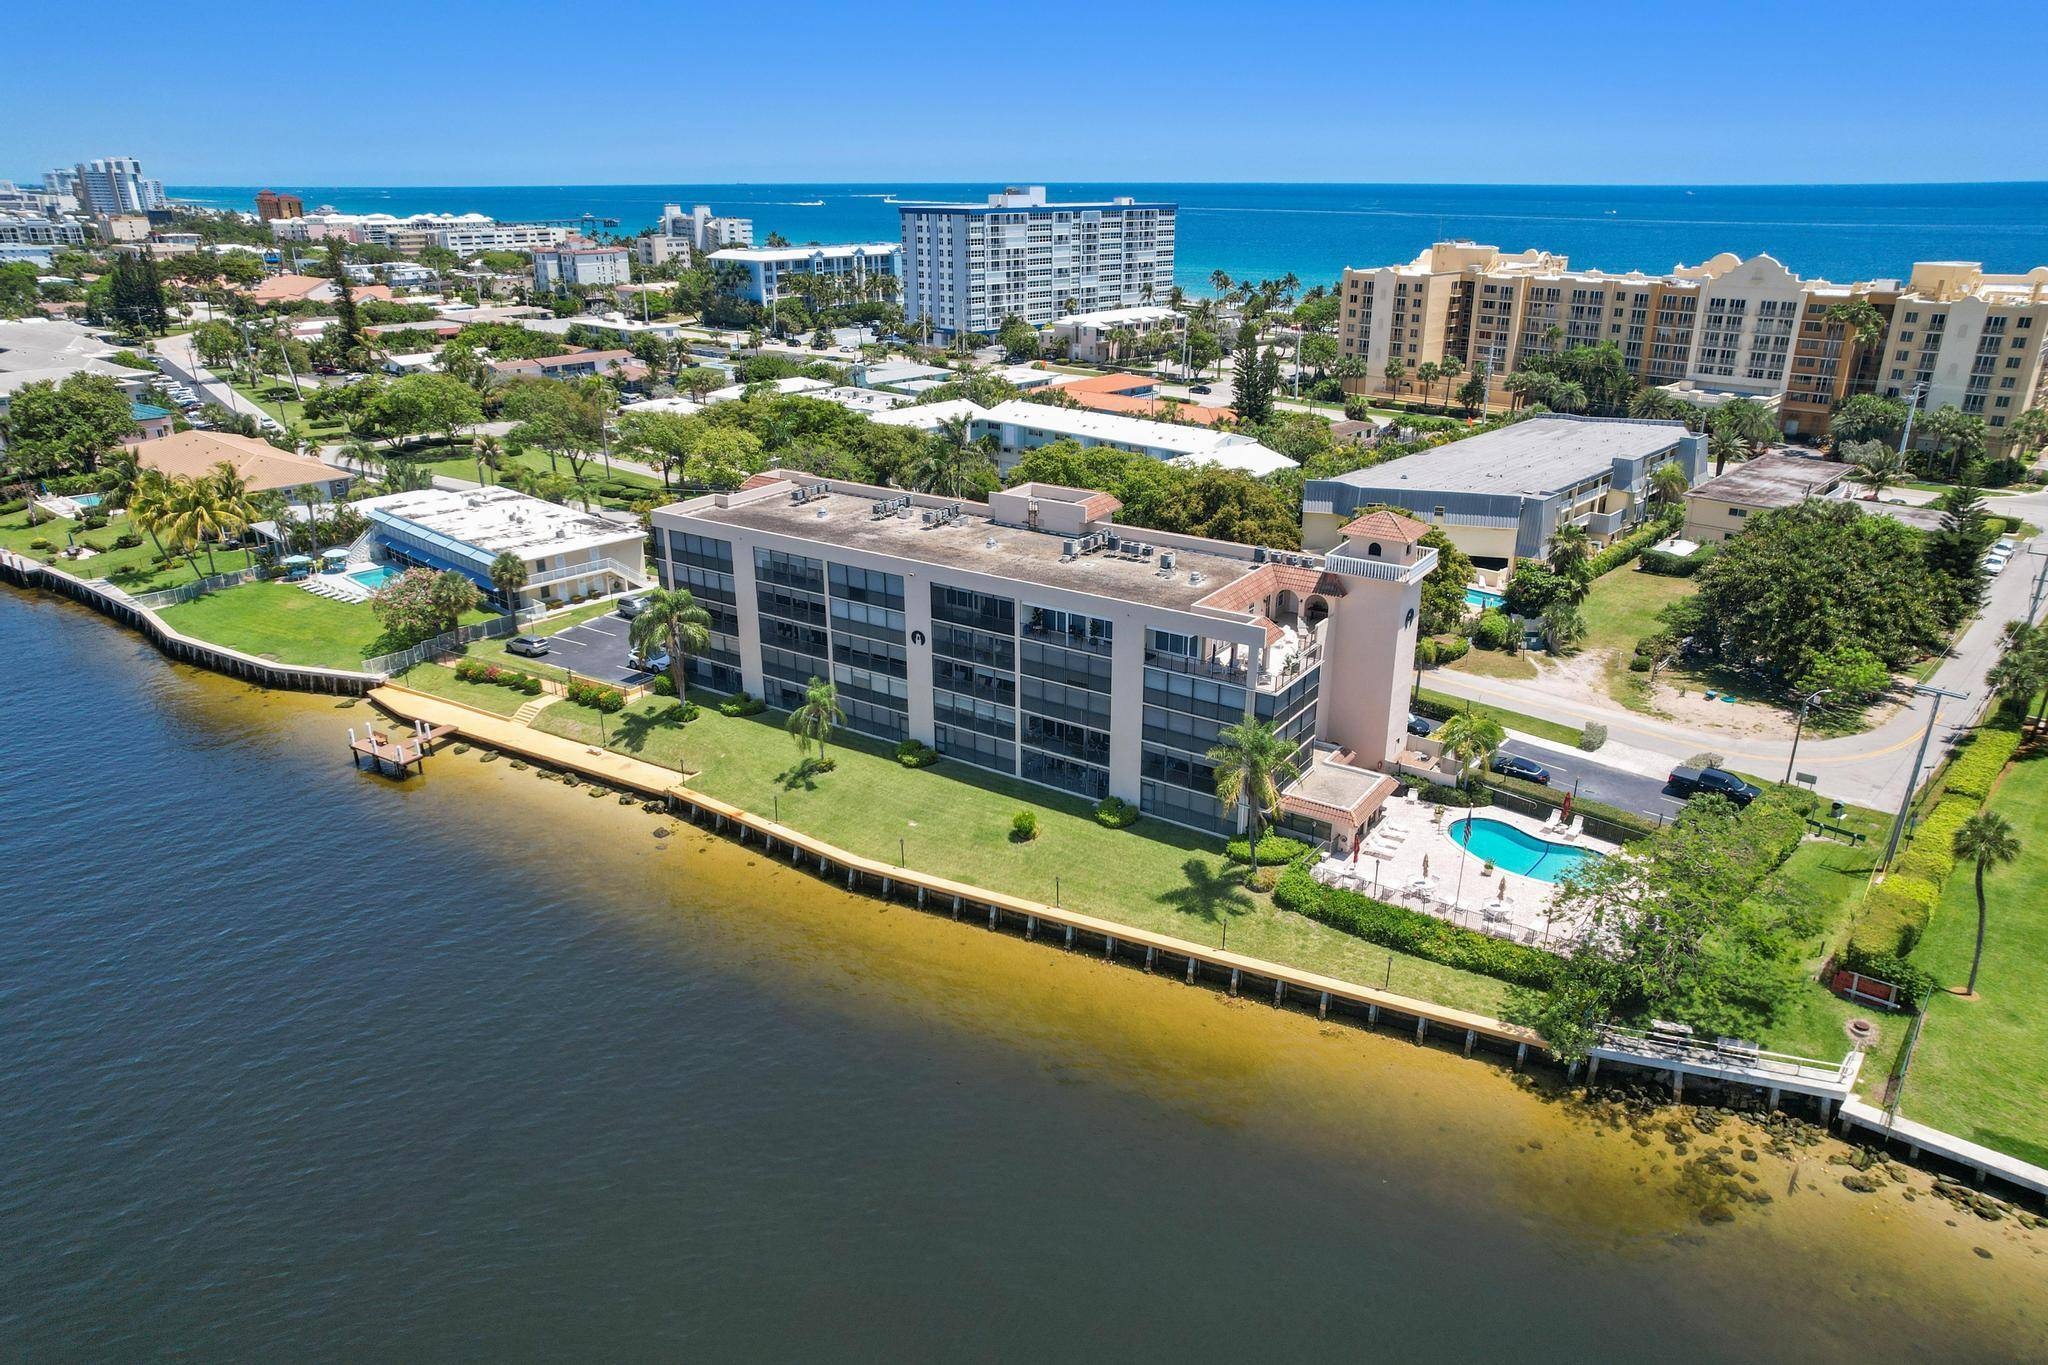 Intracoastal Ocean views abound in this Rare Unique One Of A Kind Builders own custom corner Penthouse model made by combining 3 units.